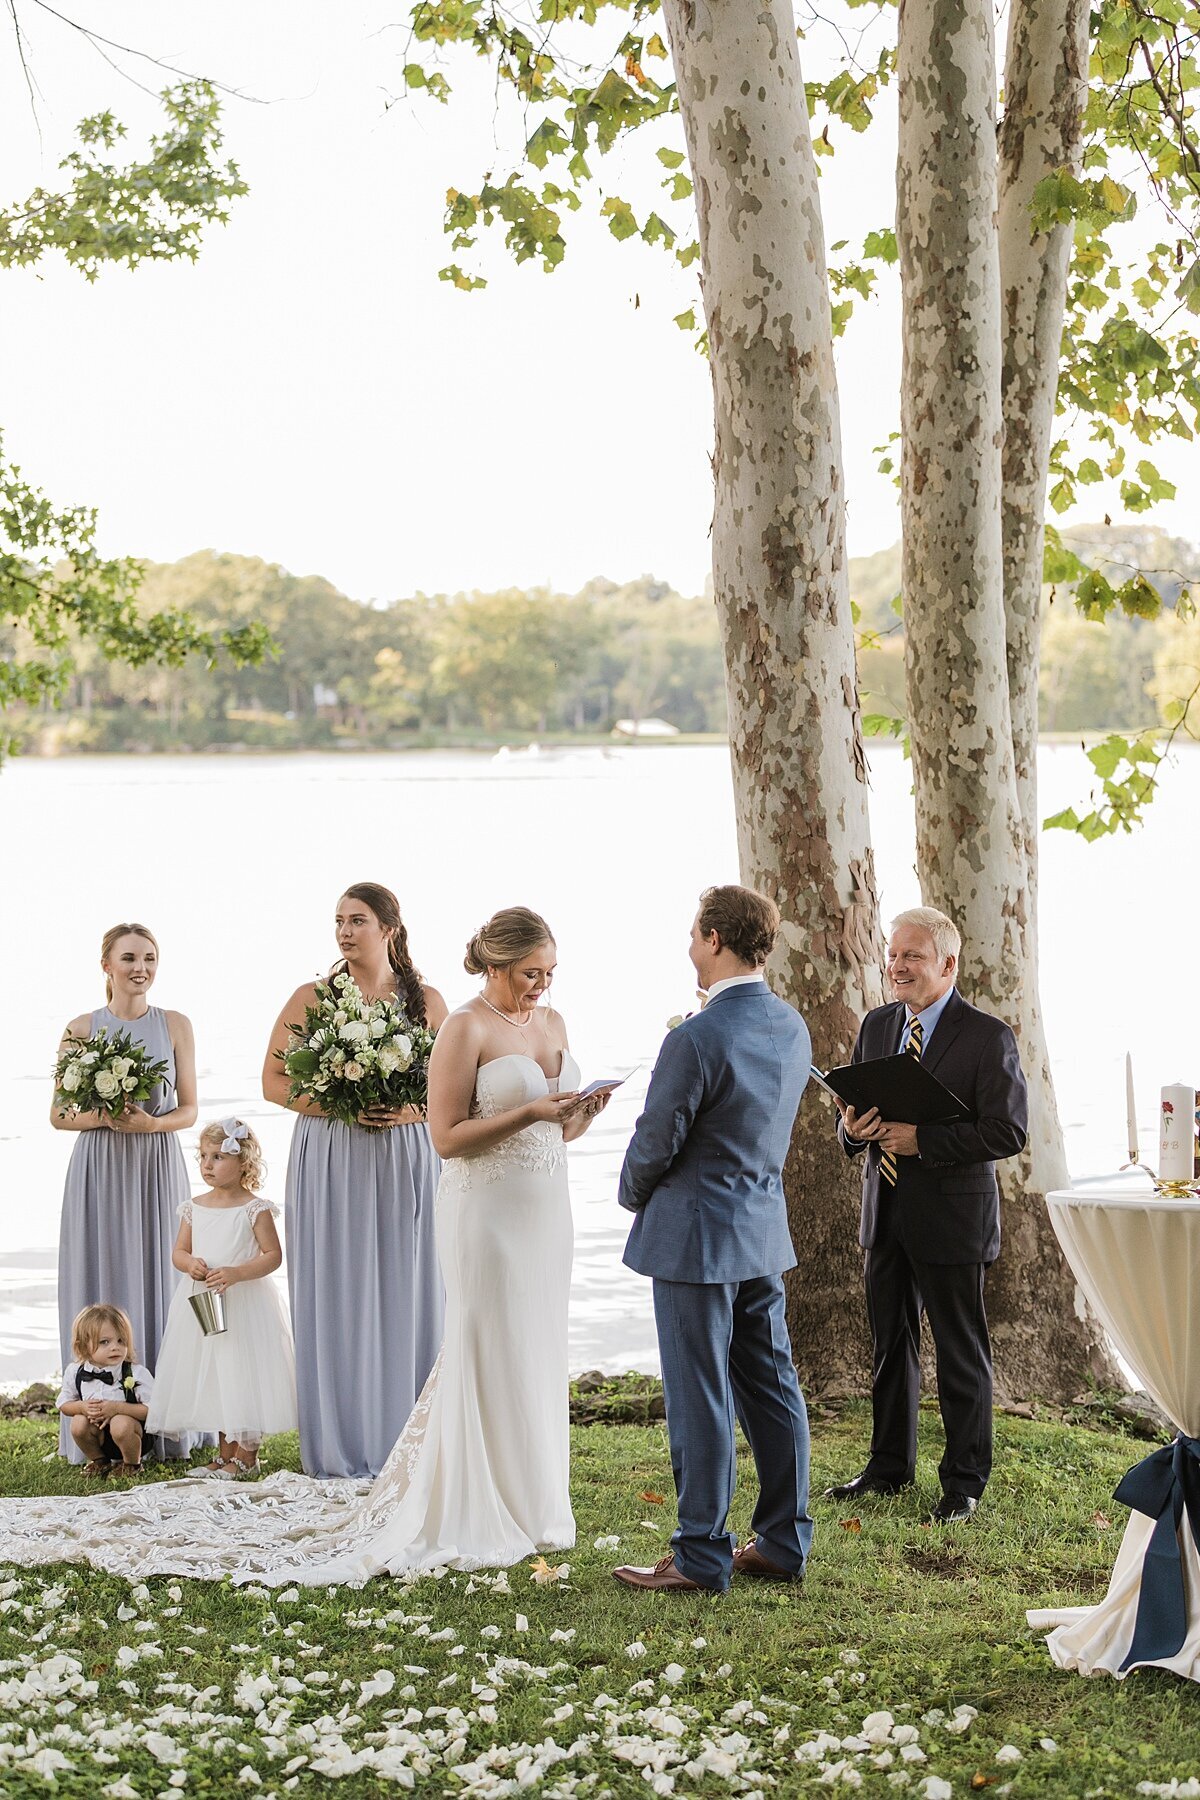 Bride wearing a strapless lace wedding dress reads her vows to the groom wearing a grey suit as they stand lakeside at The Estate at Cherokee Dock. The bridal party, dressed in light blue holding bouquets of white and yellow flowers stand on the lawn covered in white flower petals.